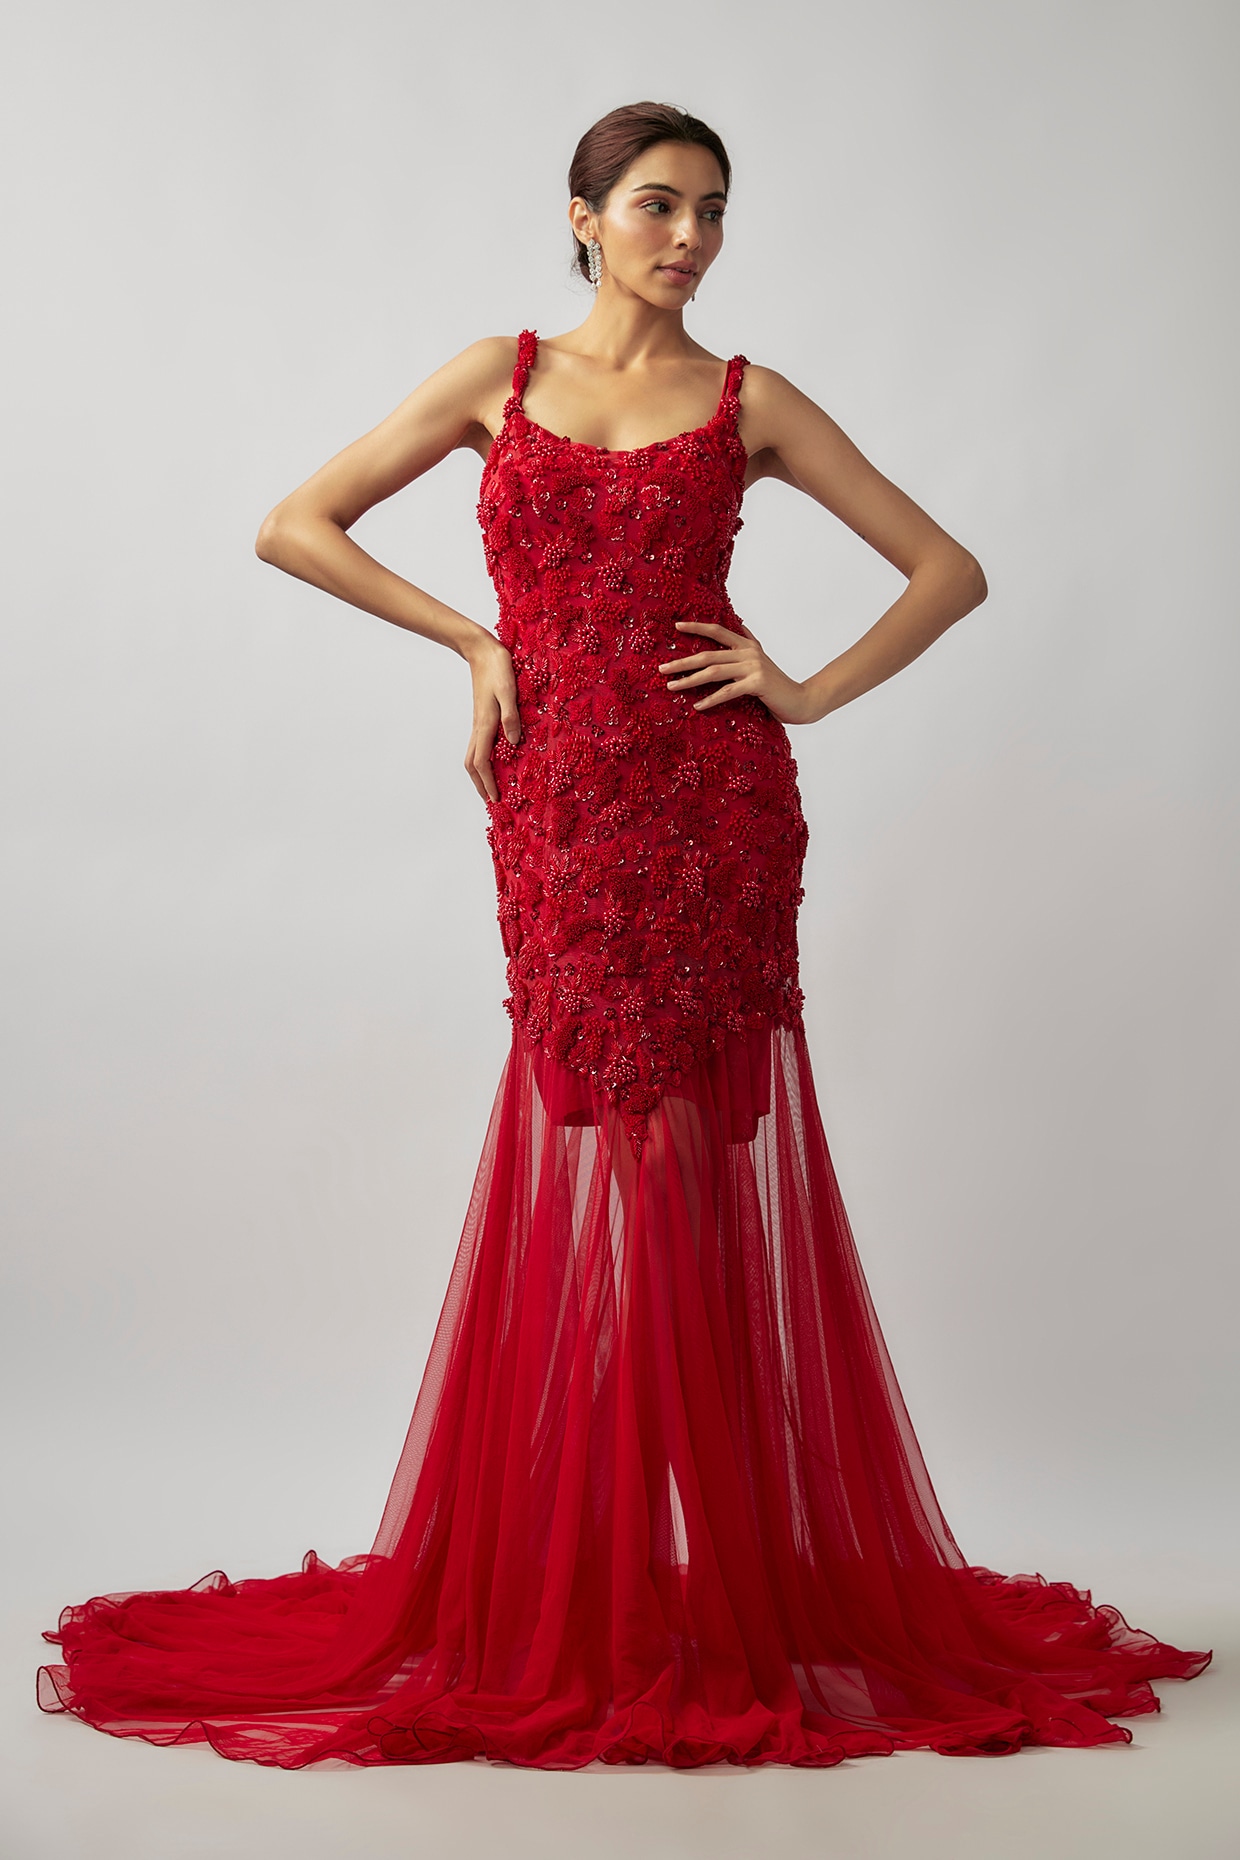 Elegant Red Gown for Women's Engagement – FOURMATCHING